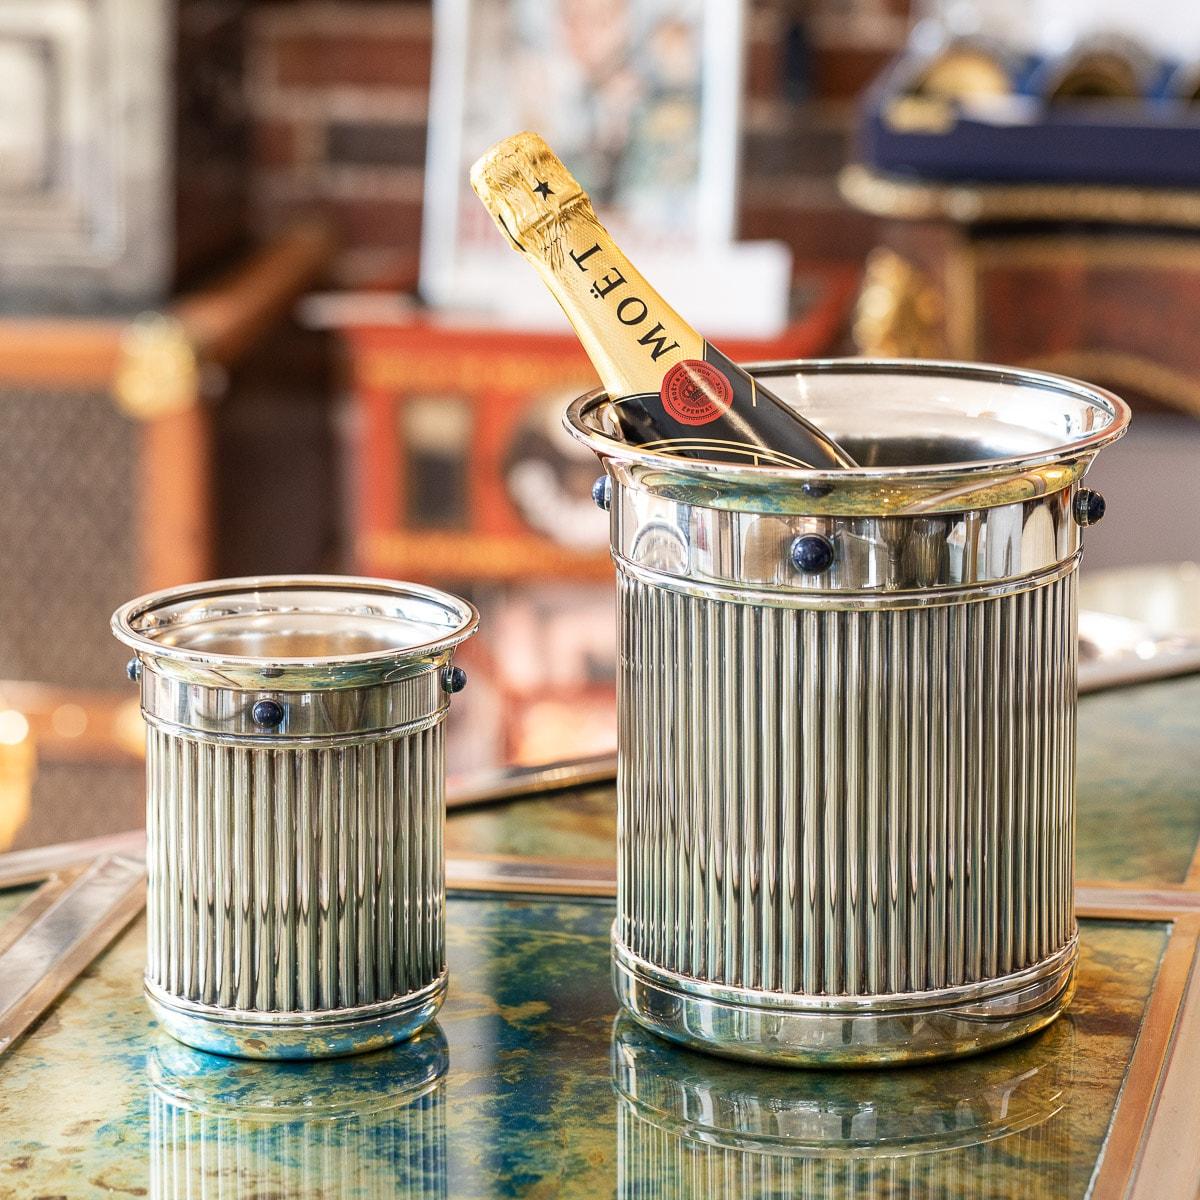 Stunning late-20th Century French silver plated champagne bottle cooler with liner and ice bucket, all with reeded sides and set with four lapis lazuli cabochons, with original paperwork. This fine set makes a fantastic statement piece and wonderful